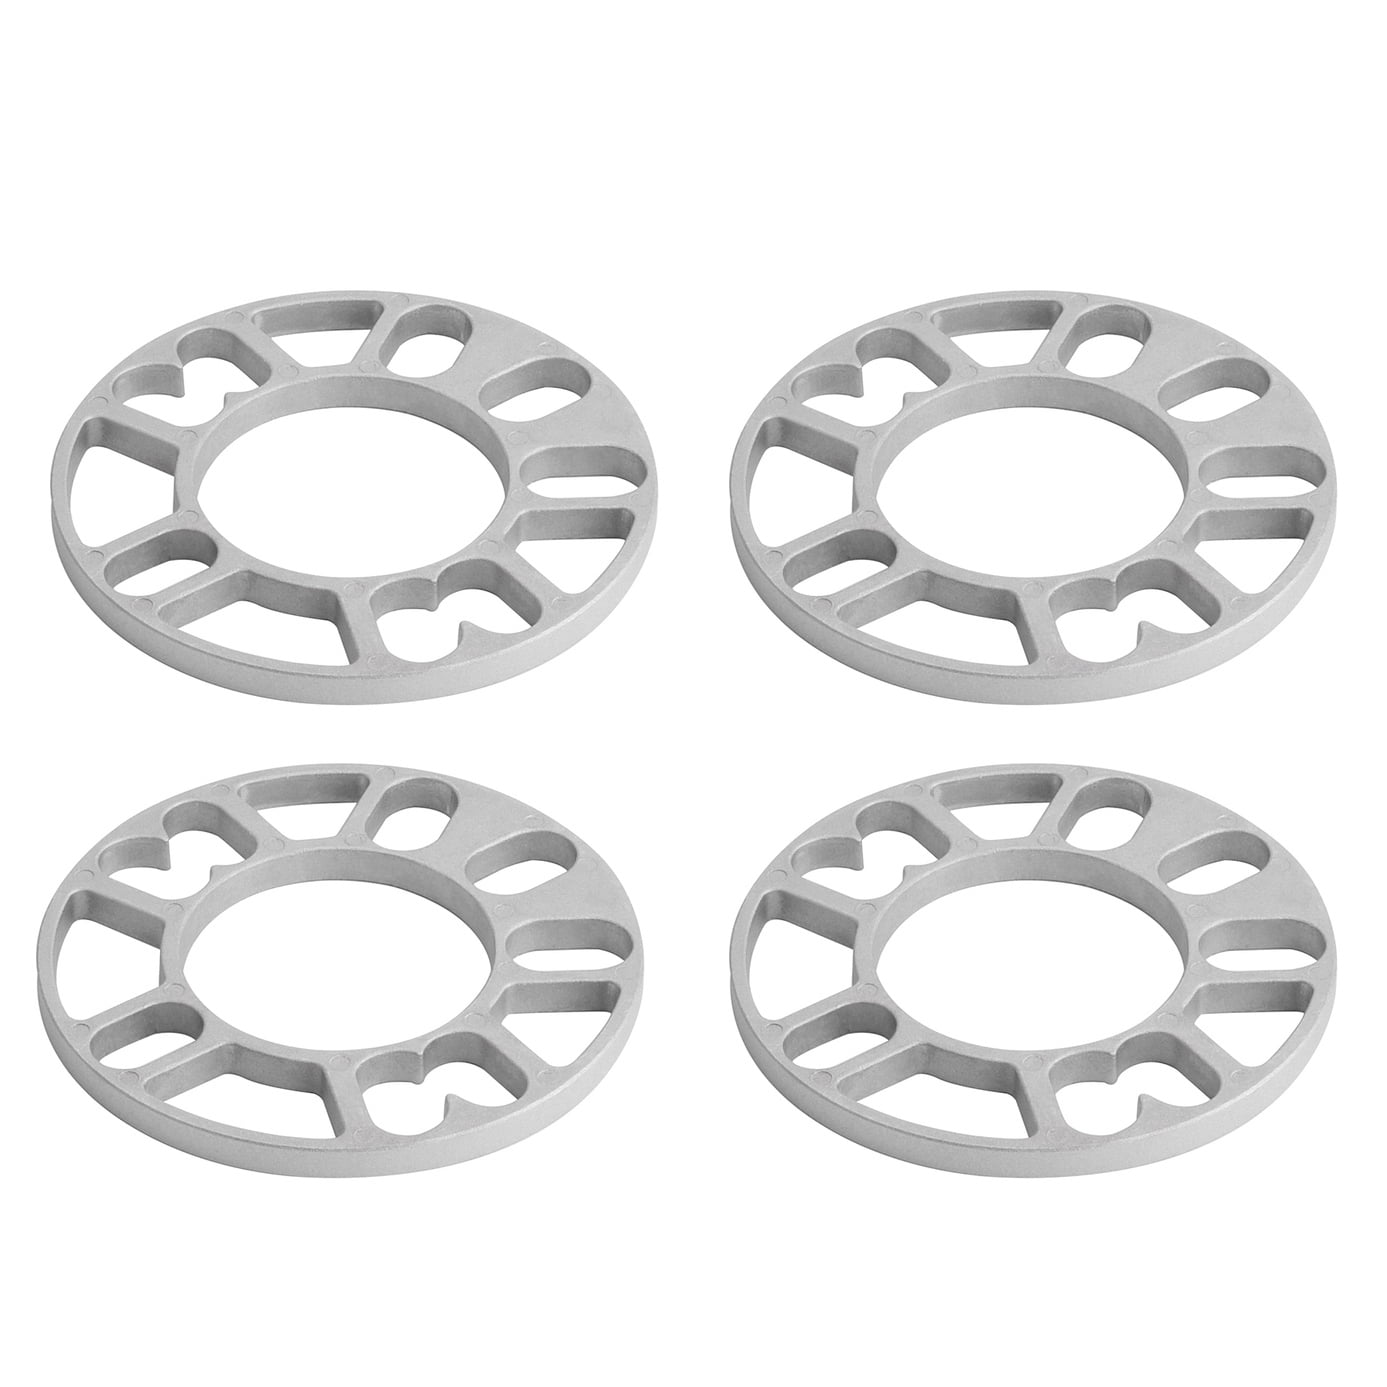 4 X 8mm ALLOY WHEEL SPACERS SHIMS SPACER UNIVERSAL FOR BMW M14X1.25B 